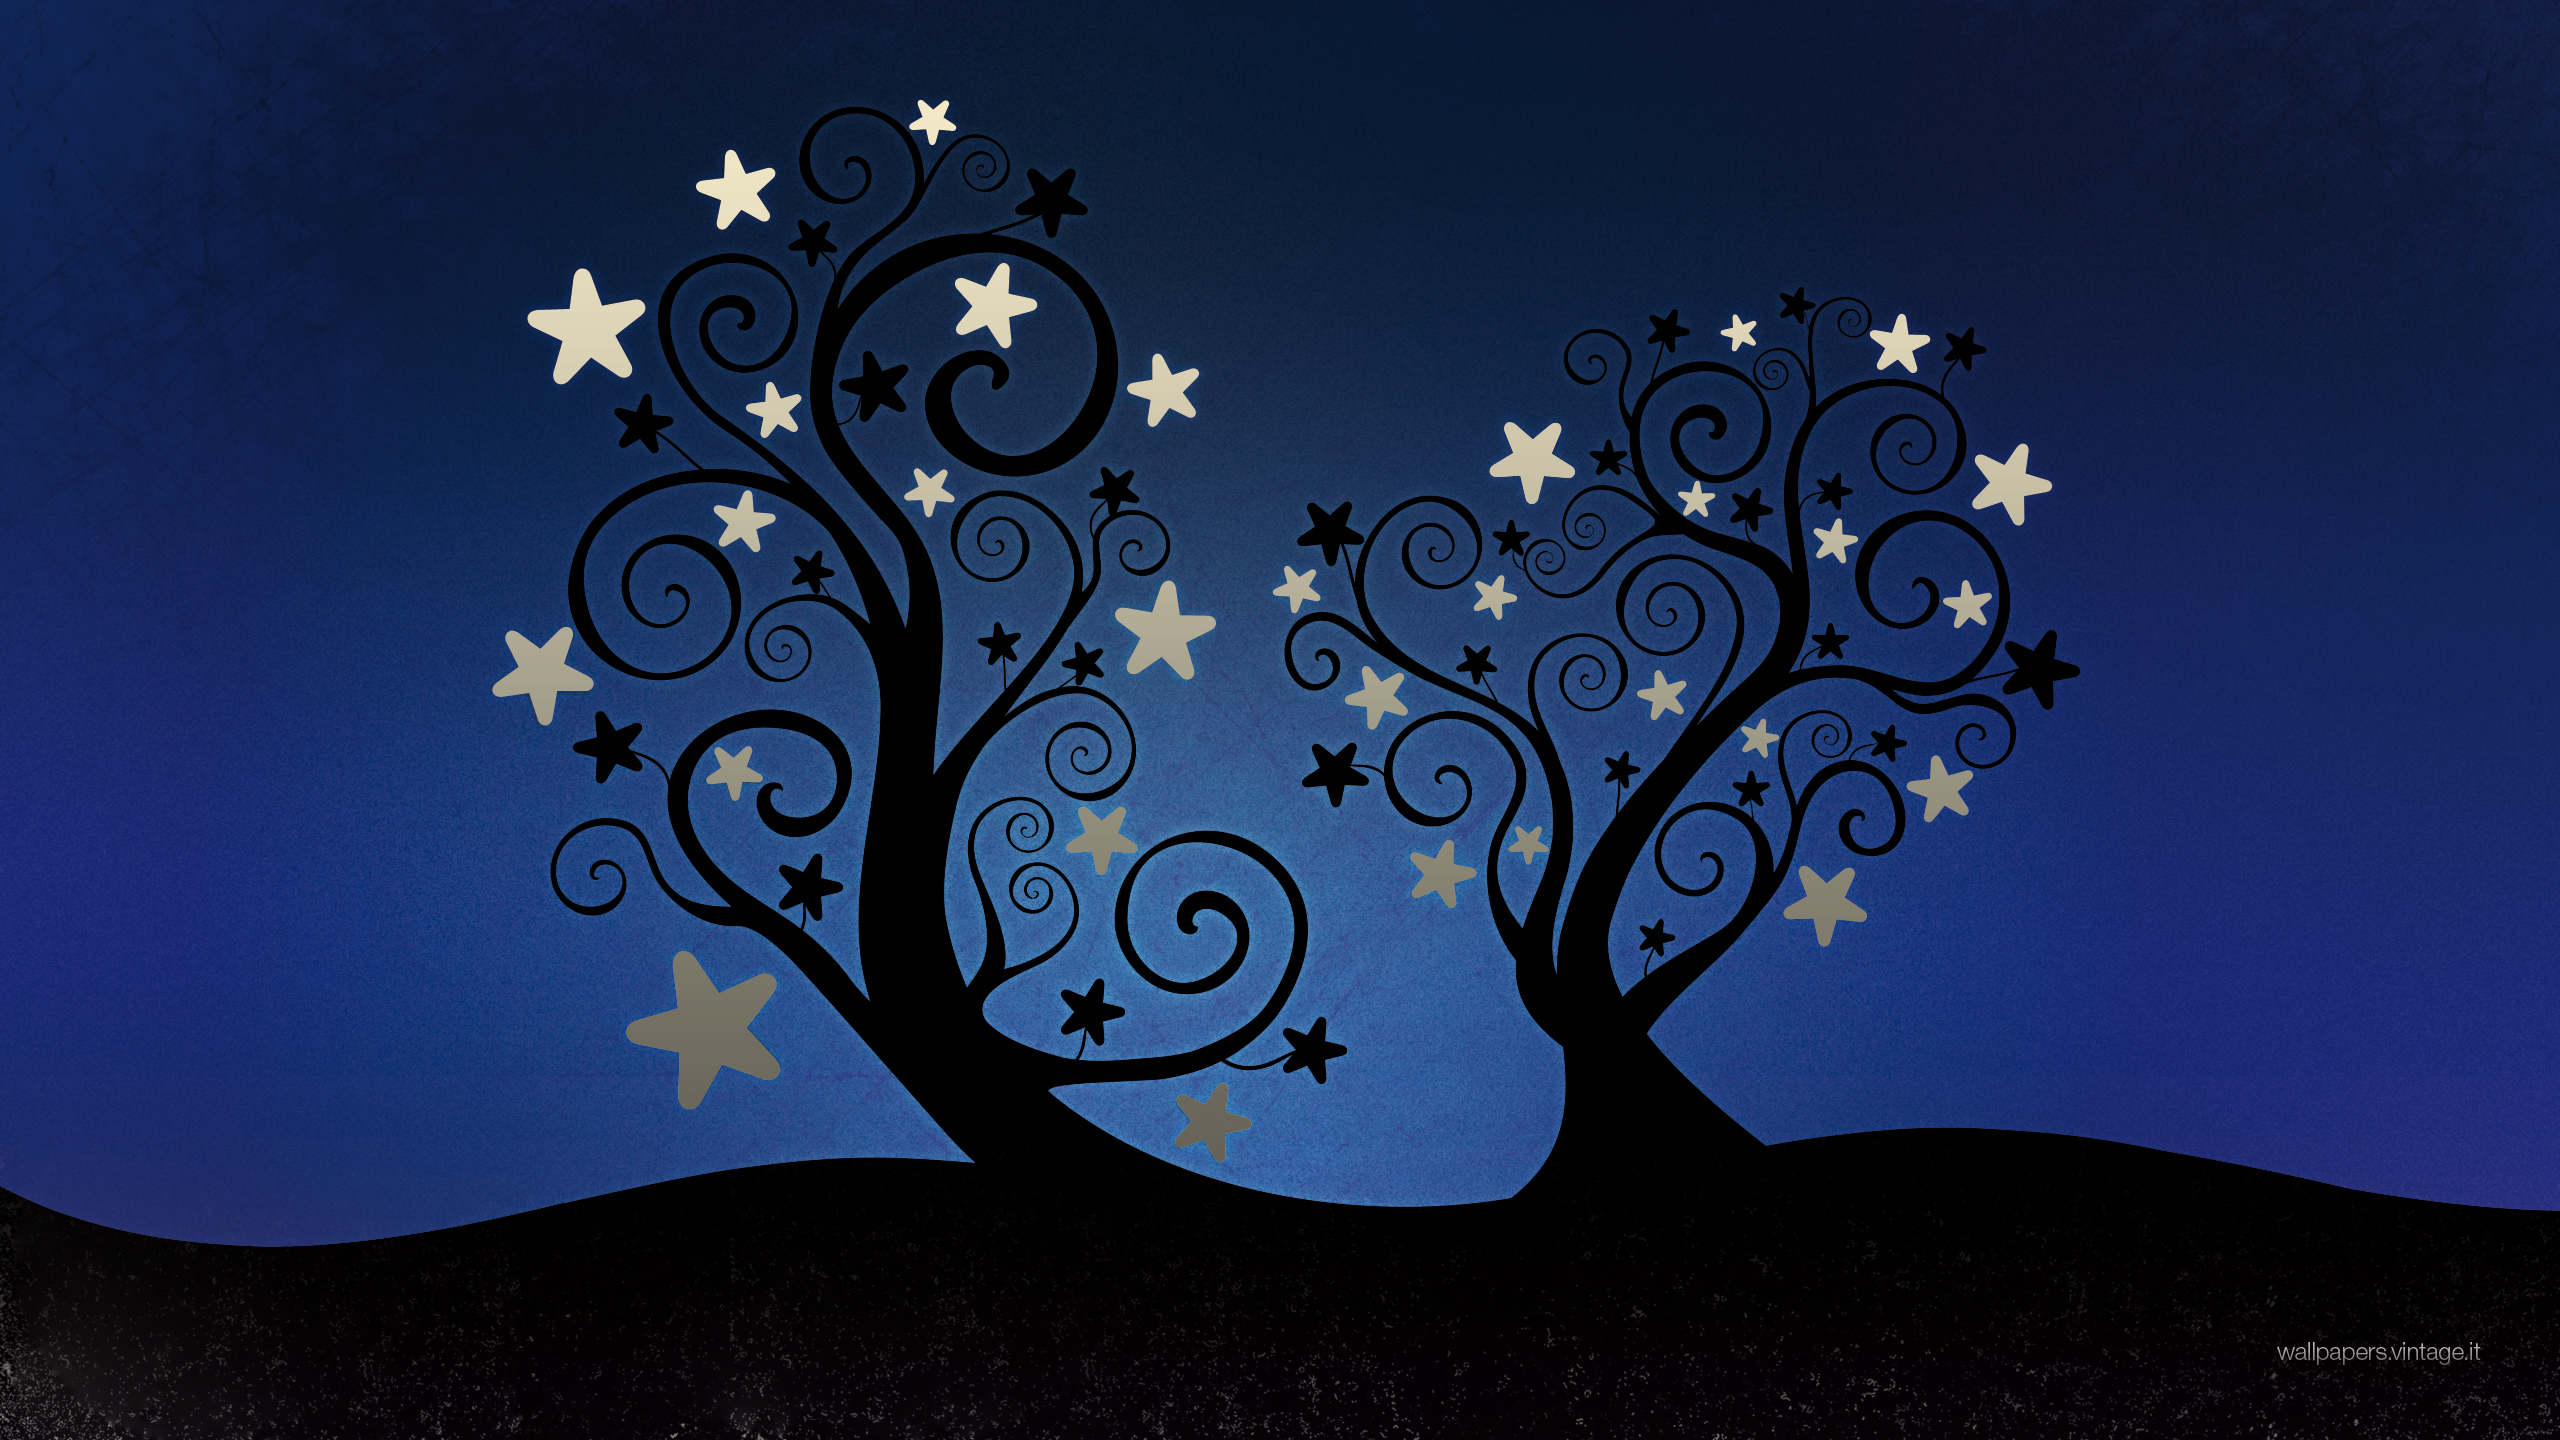 Desktop 16 - - Tree With Stars As Leaves , HD Wallpaper & Backgrounds